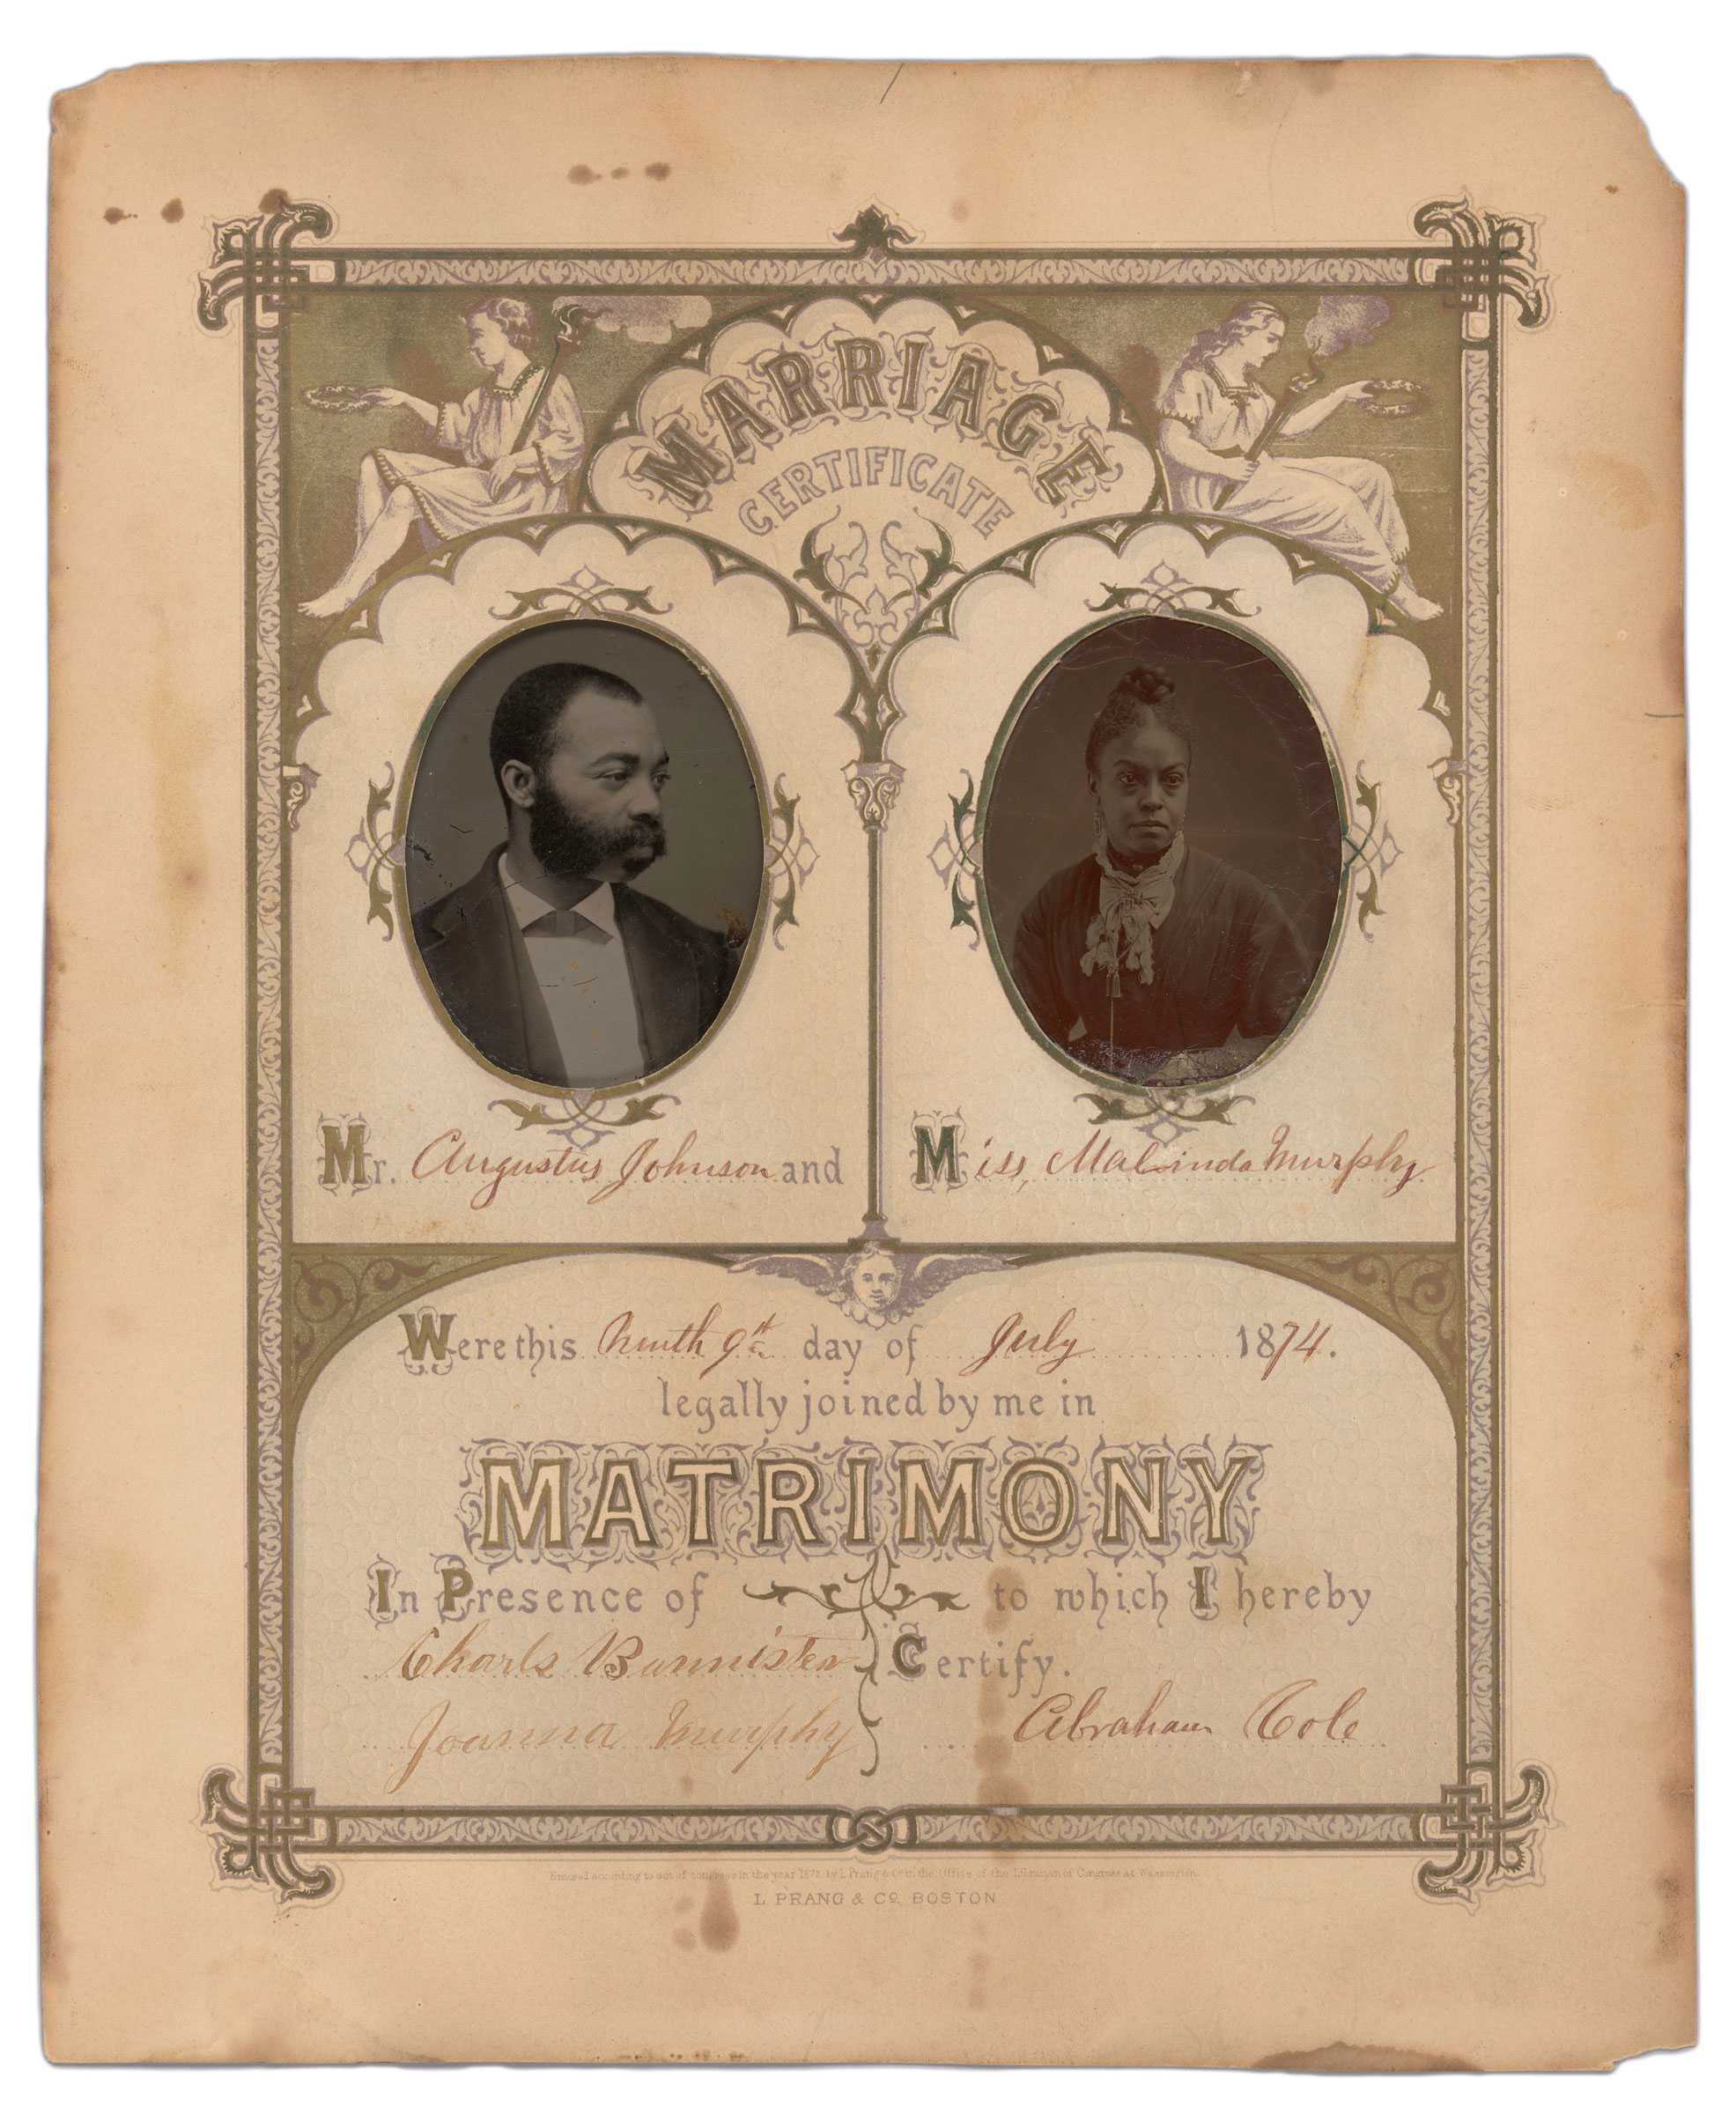 Marriage certificate with portraits of Augustus Johnson and Malinda Murphy.